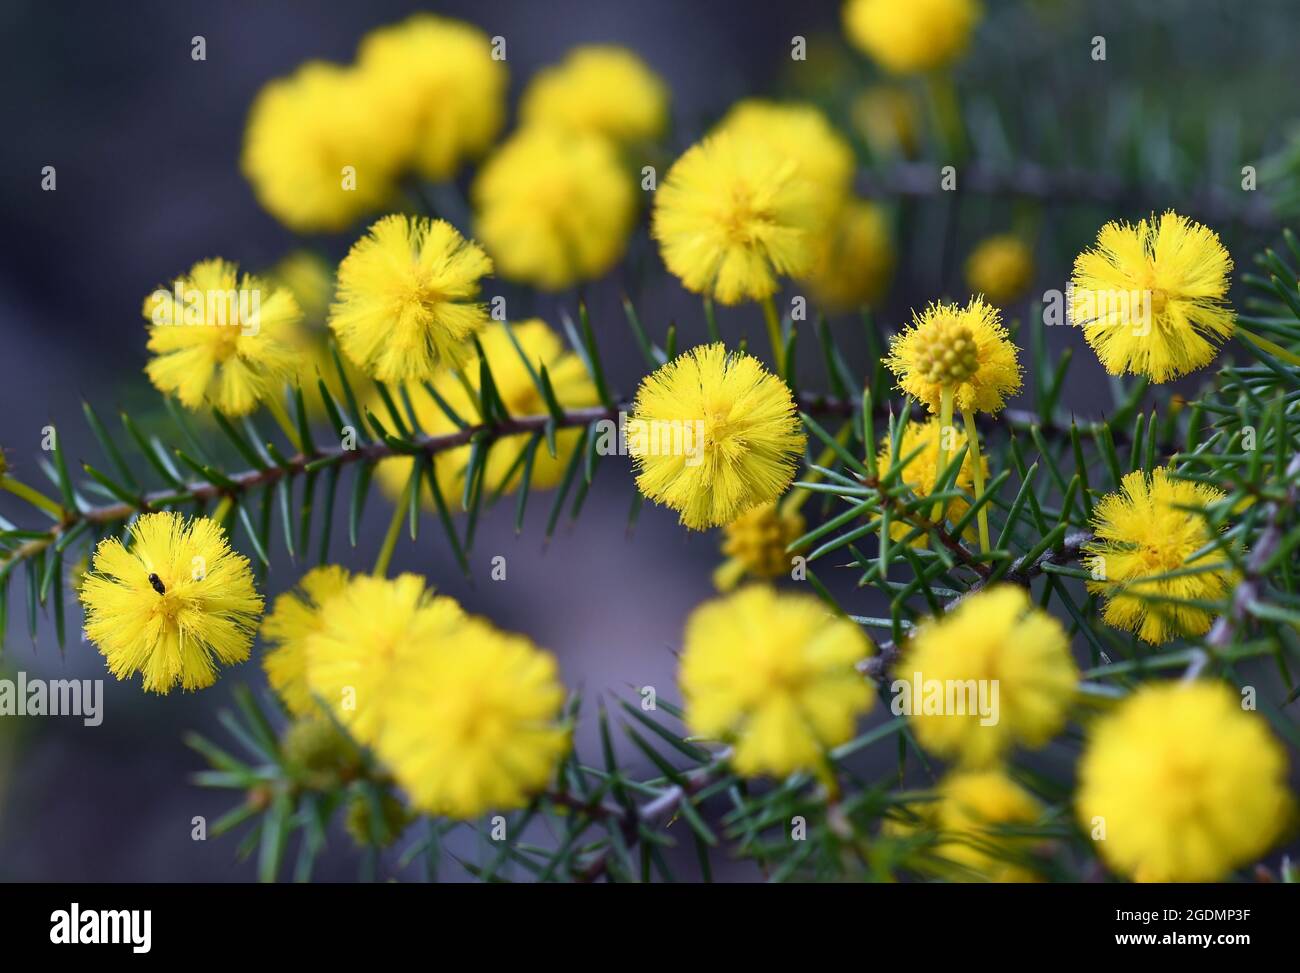 Close up of the yellow globular flowers and prickly leaves of the Australian native Hedgehog Wattle, Acacia echinula, family Fabaceae Stock Photo